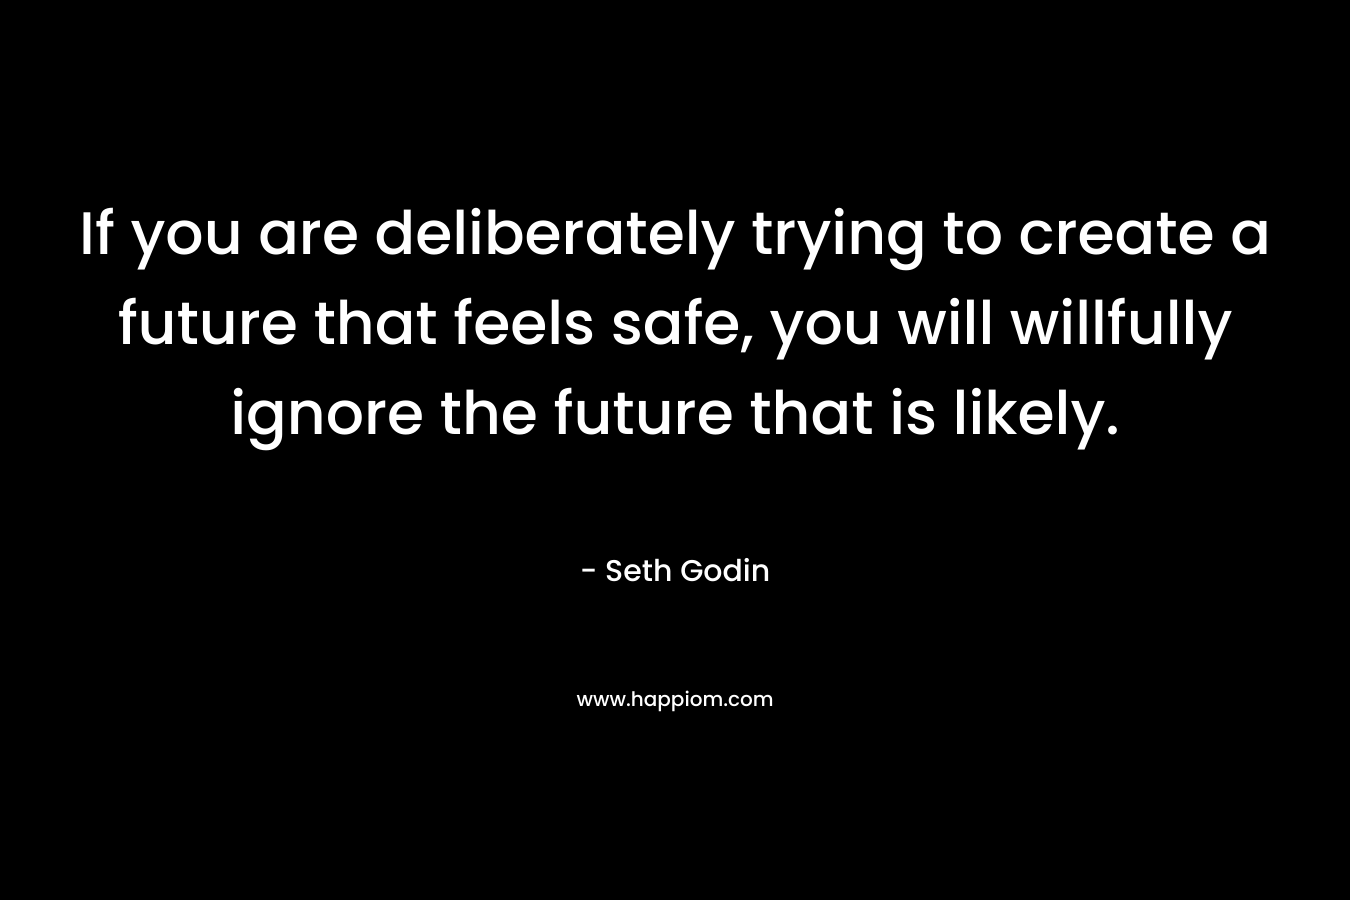 If you are deliberately trying to create a future that feels safe, you will willfully ignore the future that is likely. – Seth Godin